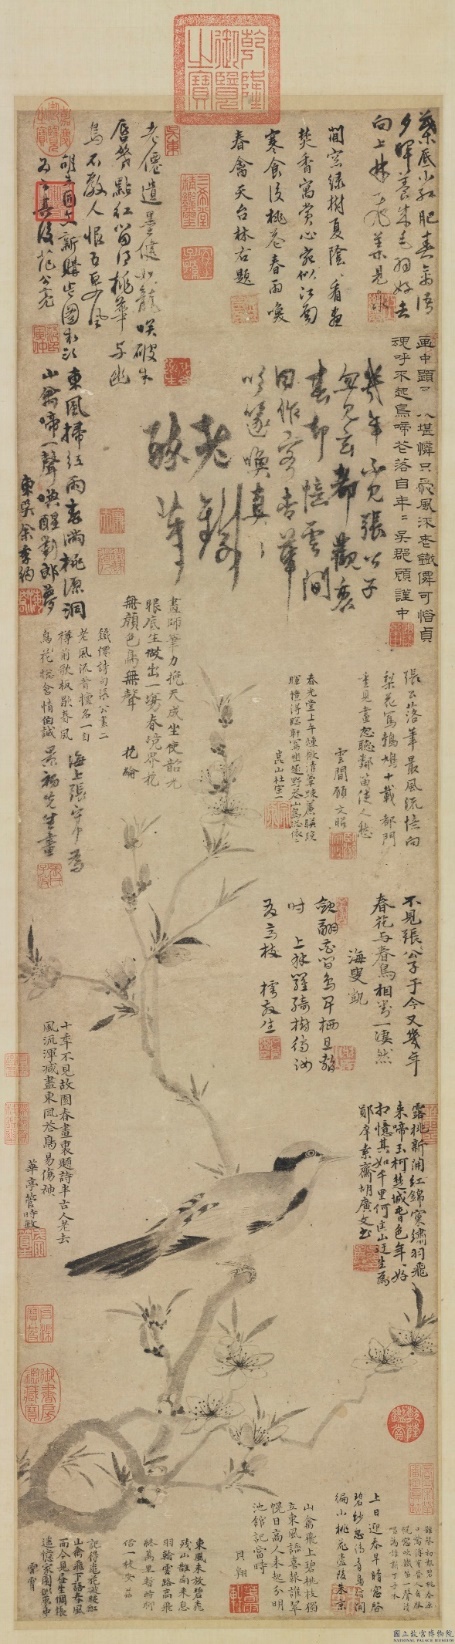 Fig. 9 Yuan Dynasty, Zhang Zhong, "Peach Blossoms and Birds", 112.2x31.4cm, ink and pen on paper, in the collection of the National Palace Museum, Taipei.